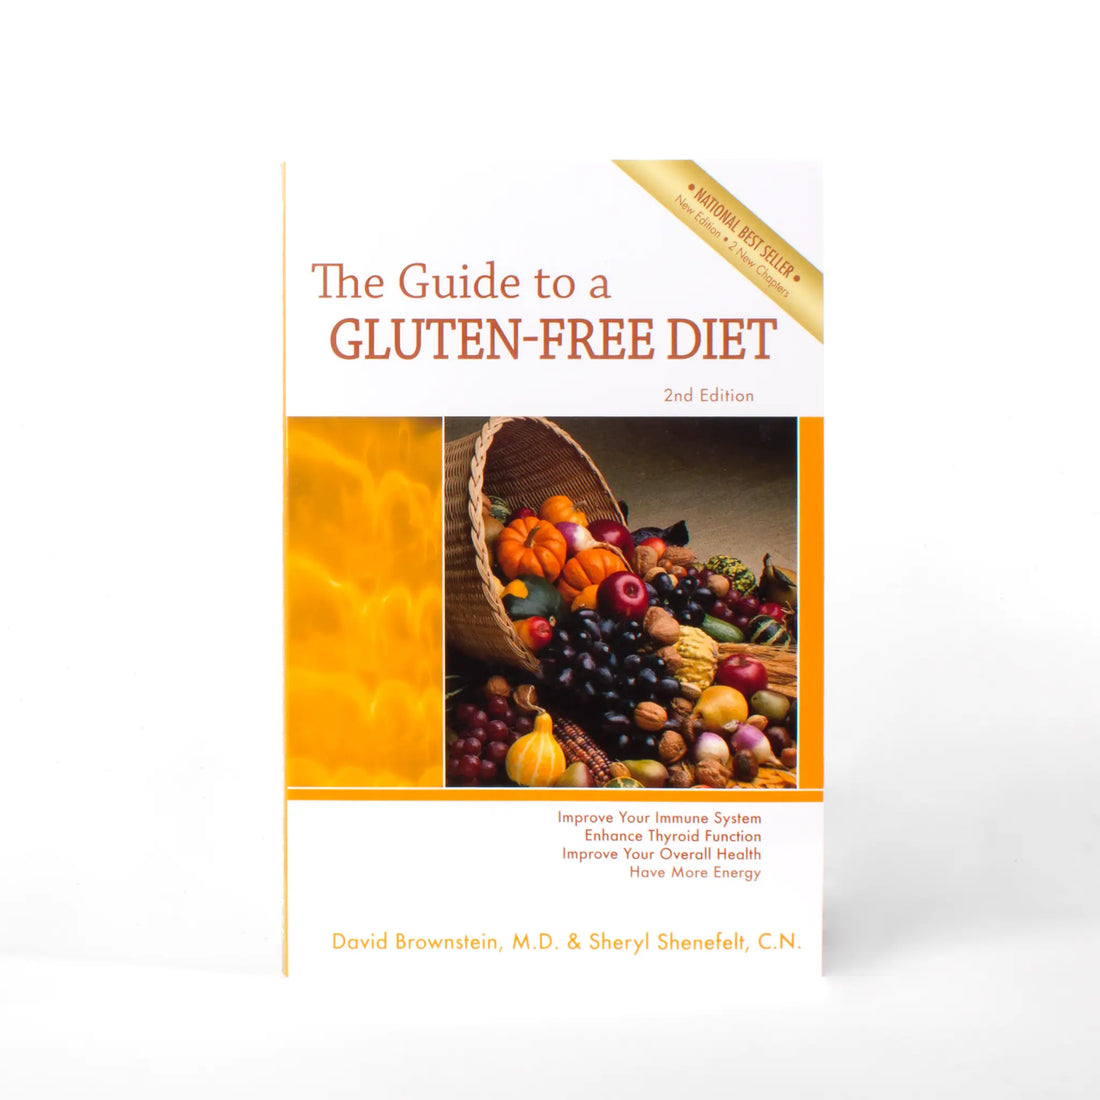 The Guide to Gluten-Free Diet